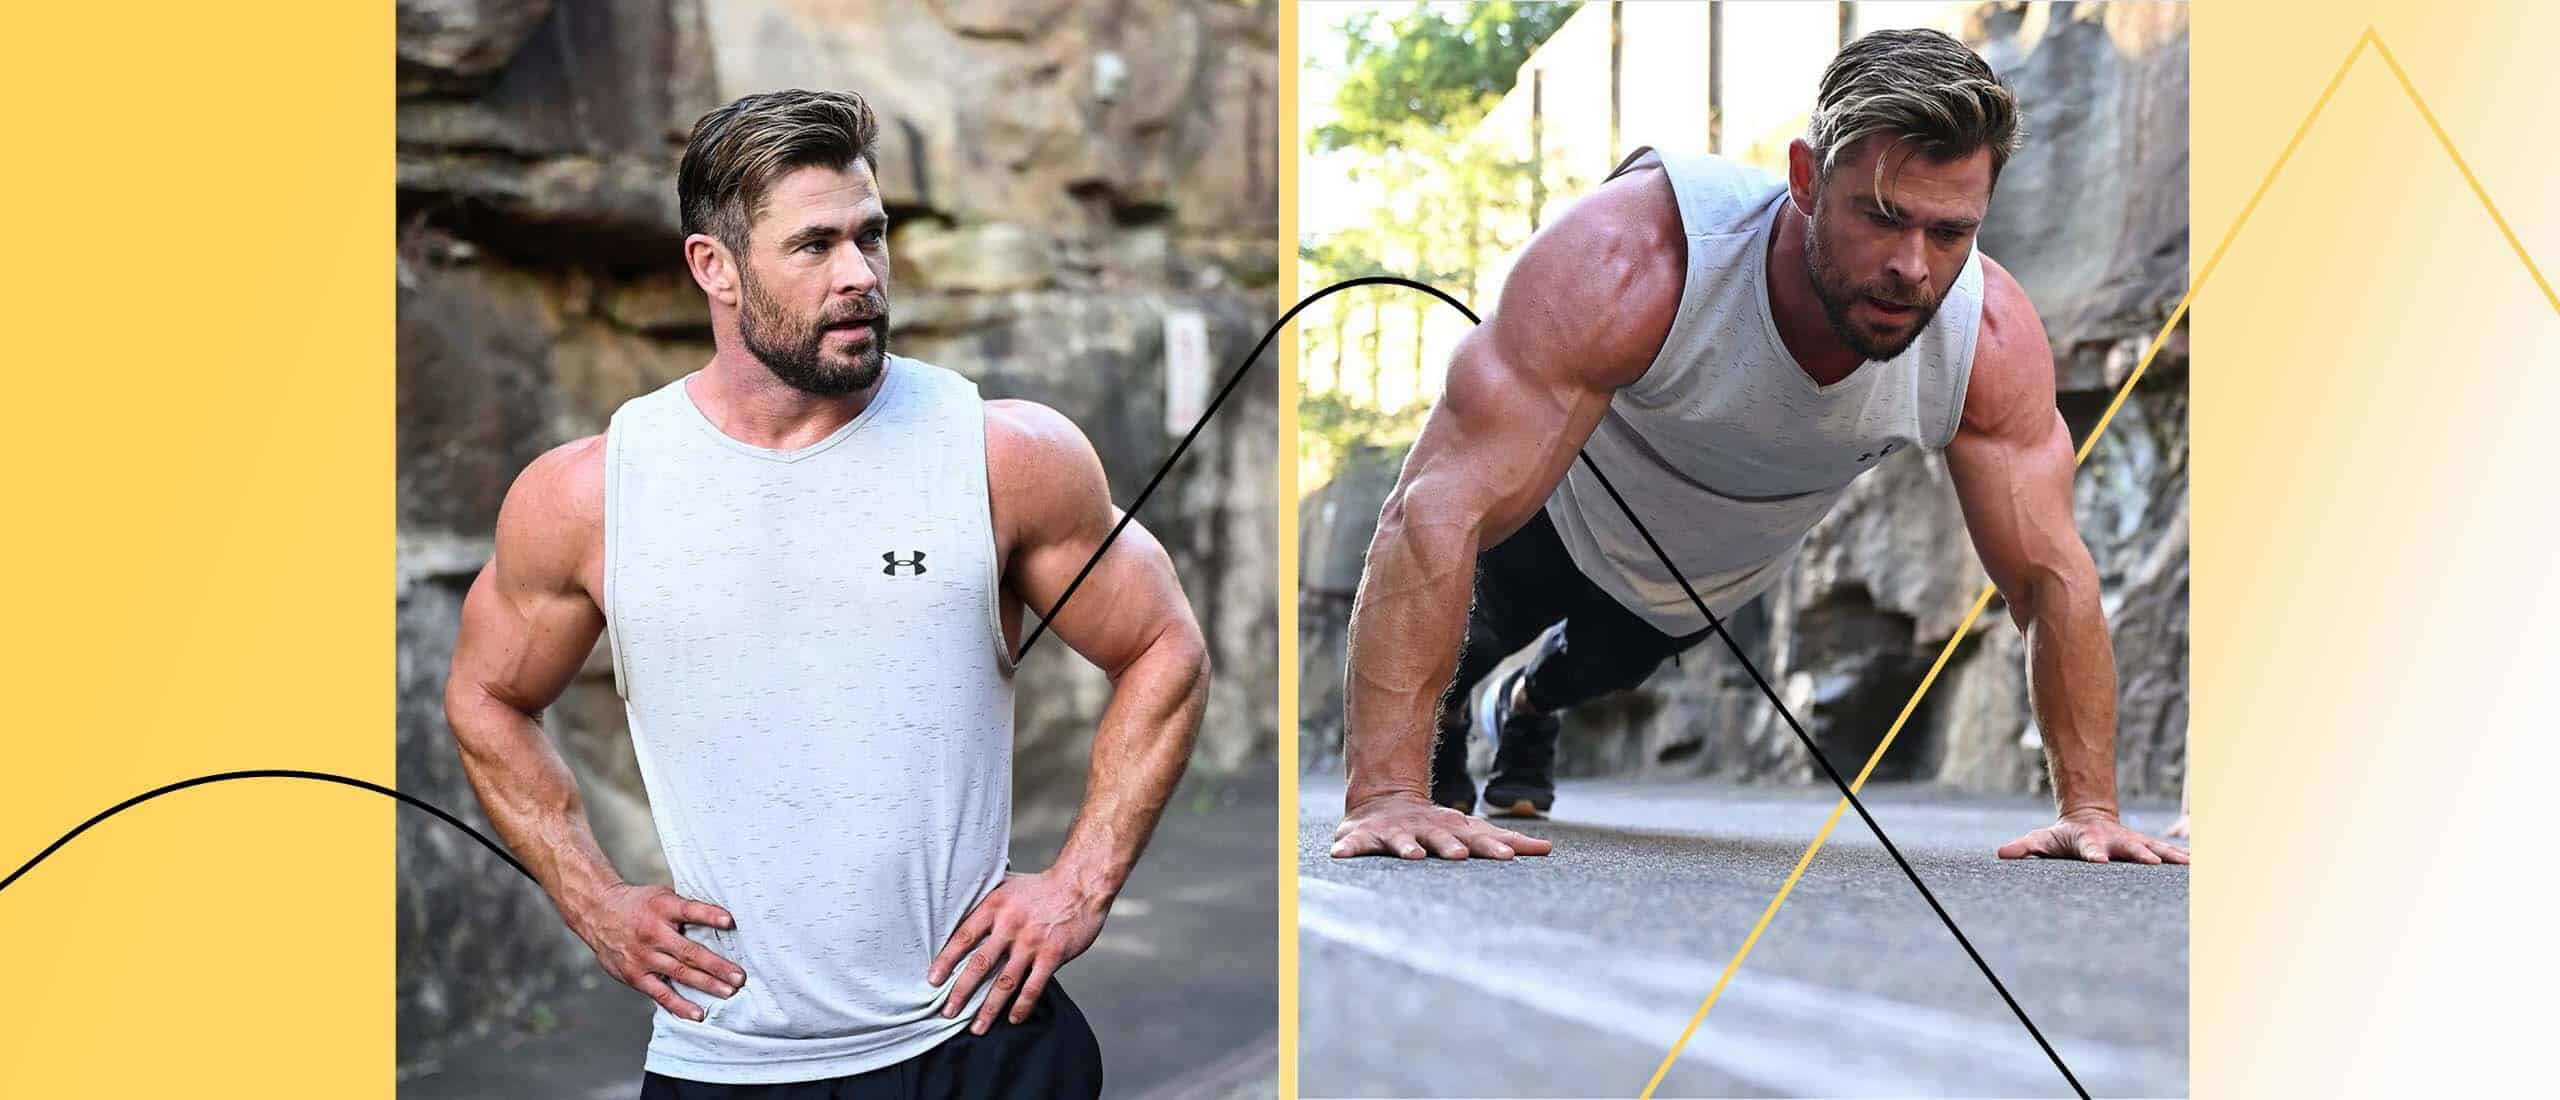 Chris Hemsworth showing off muscles